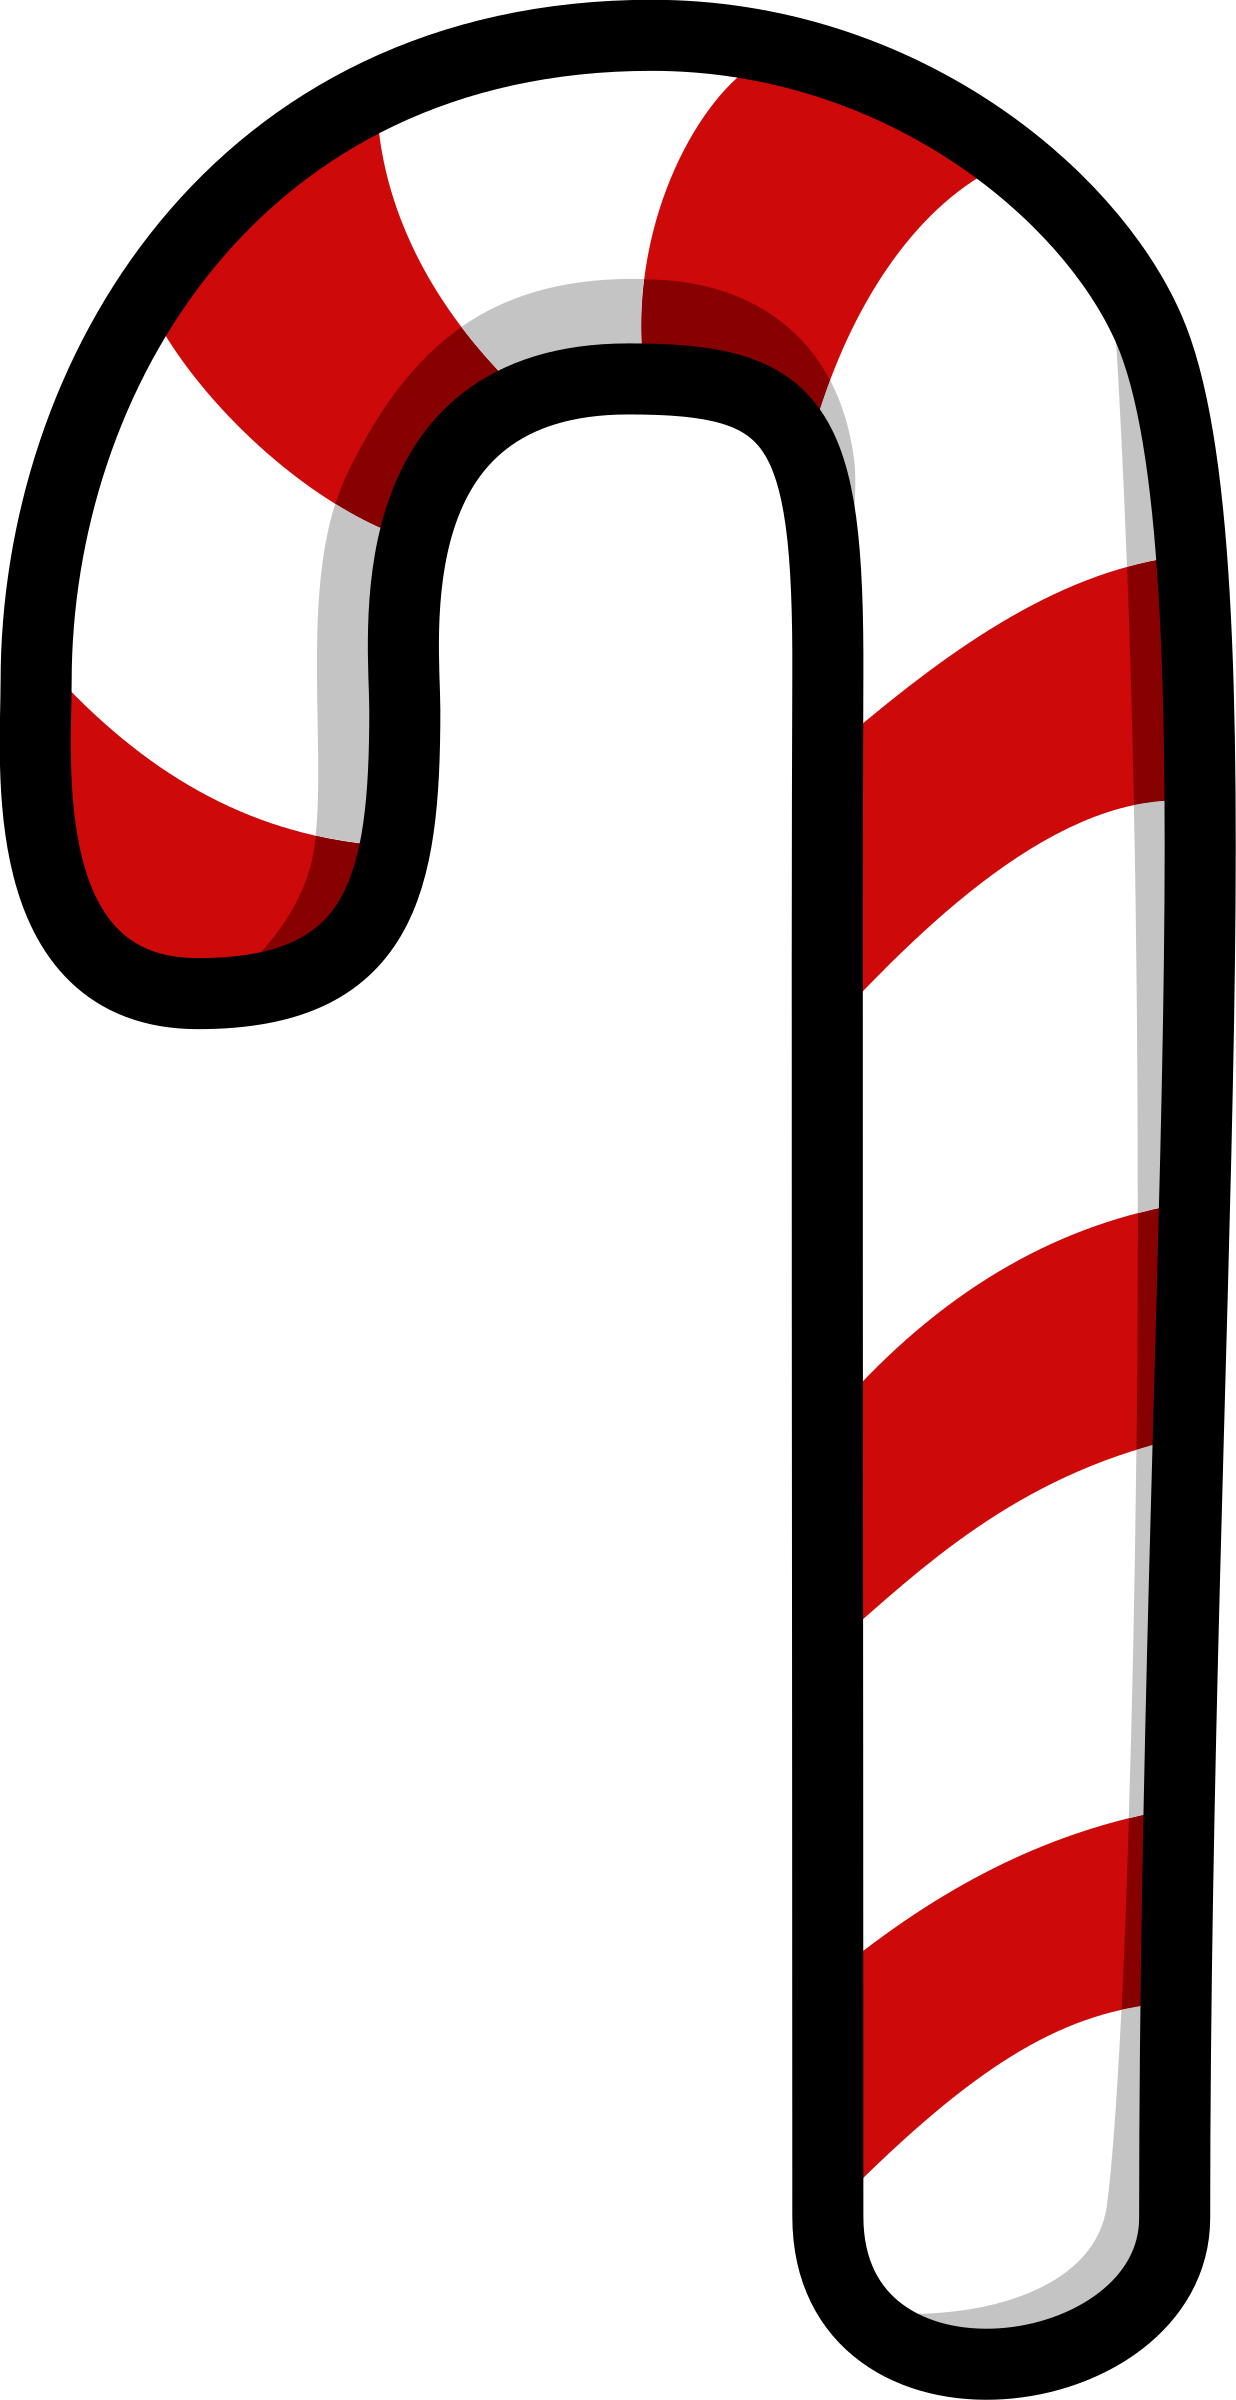 Clipart - Candy Cane . - Free Candy Cane Clipart